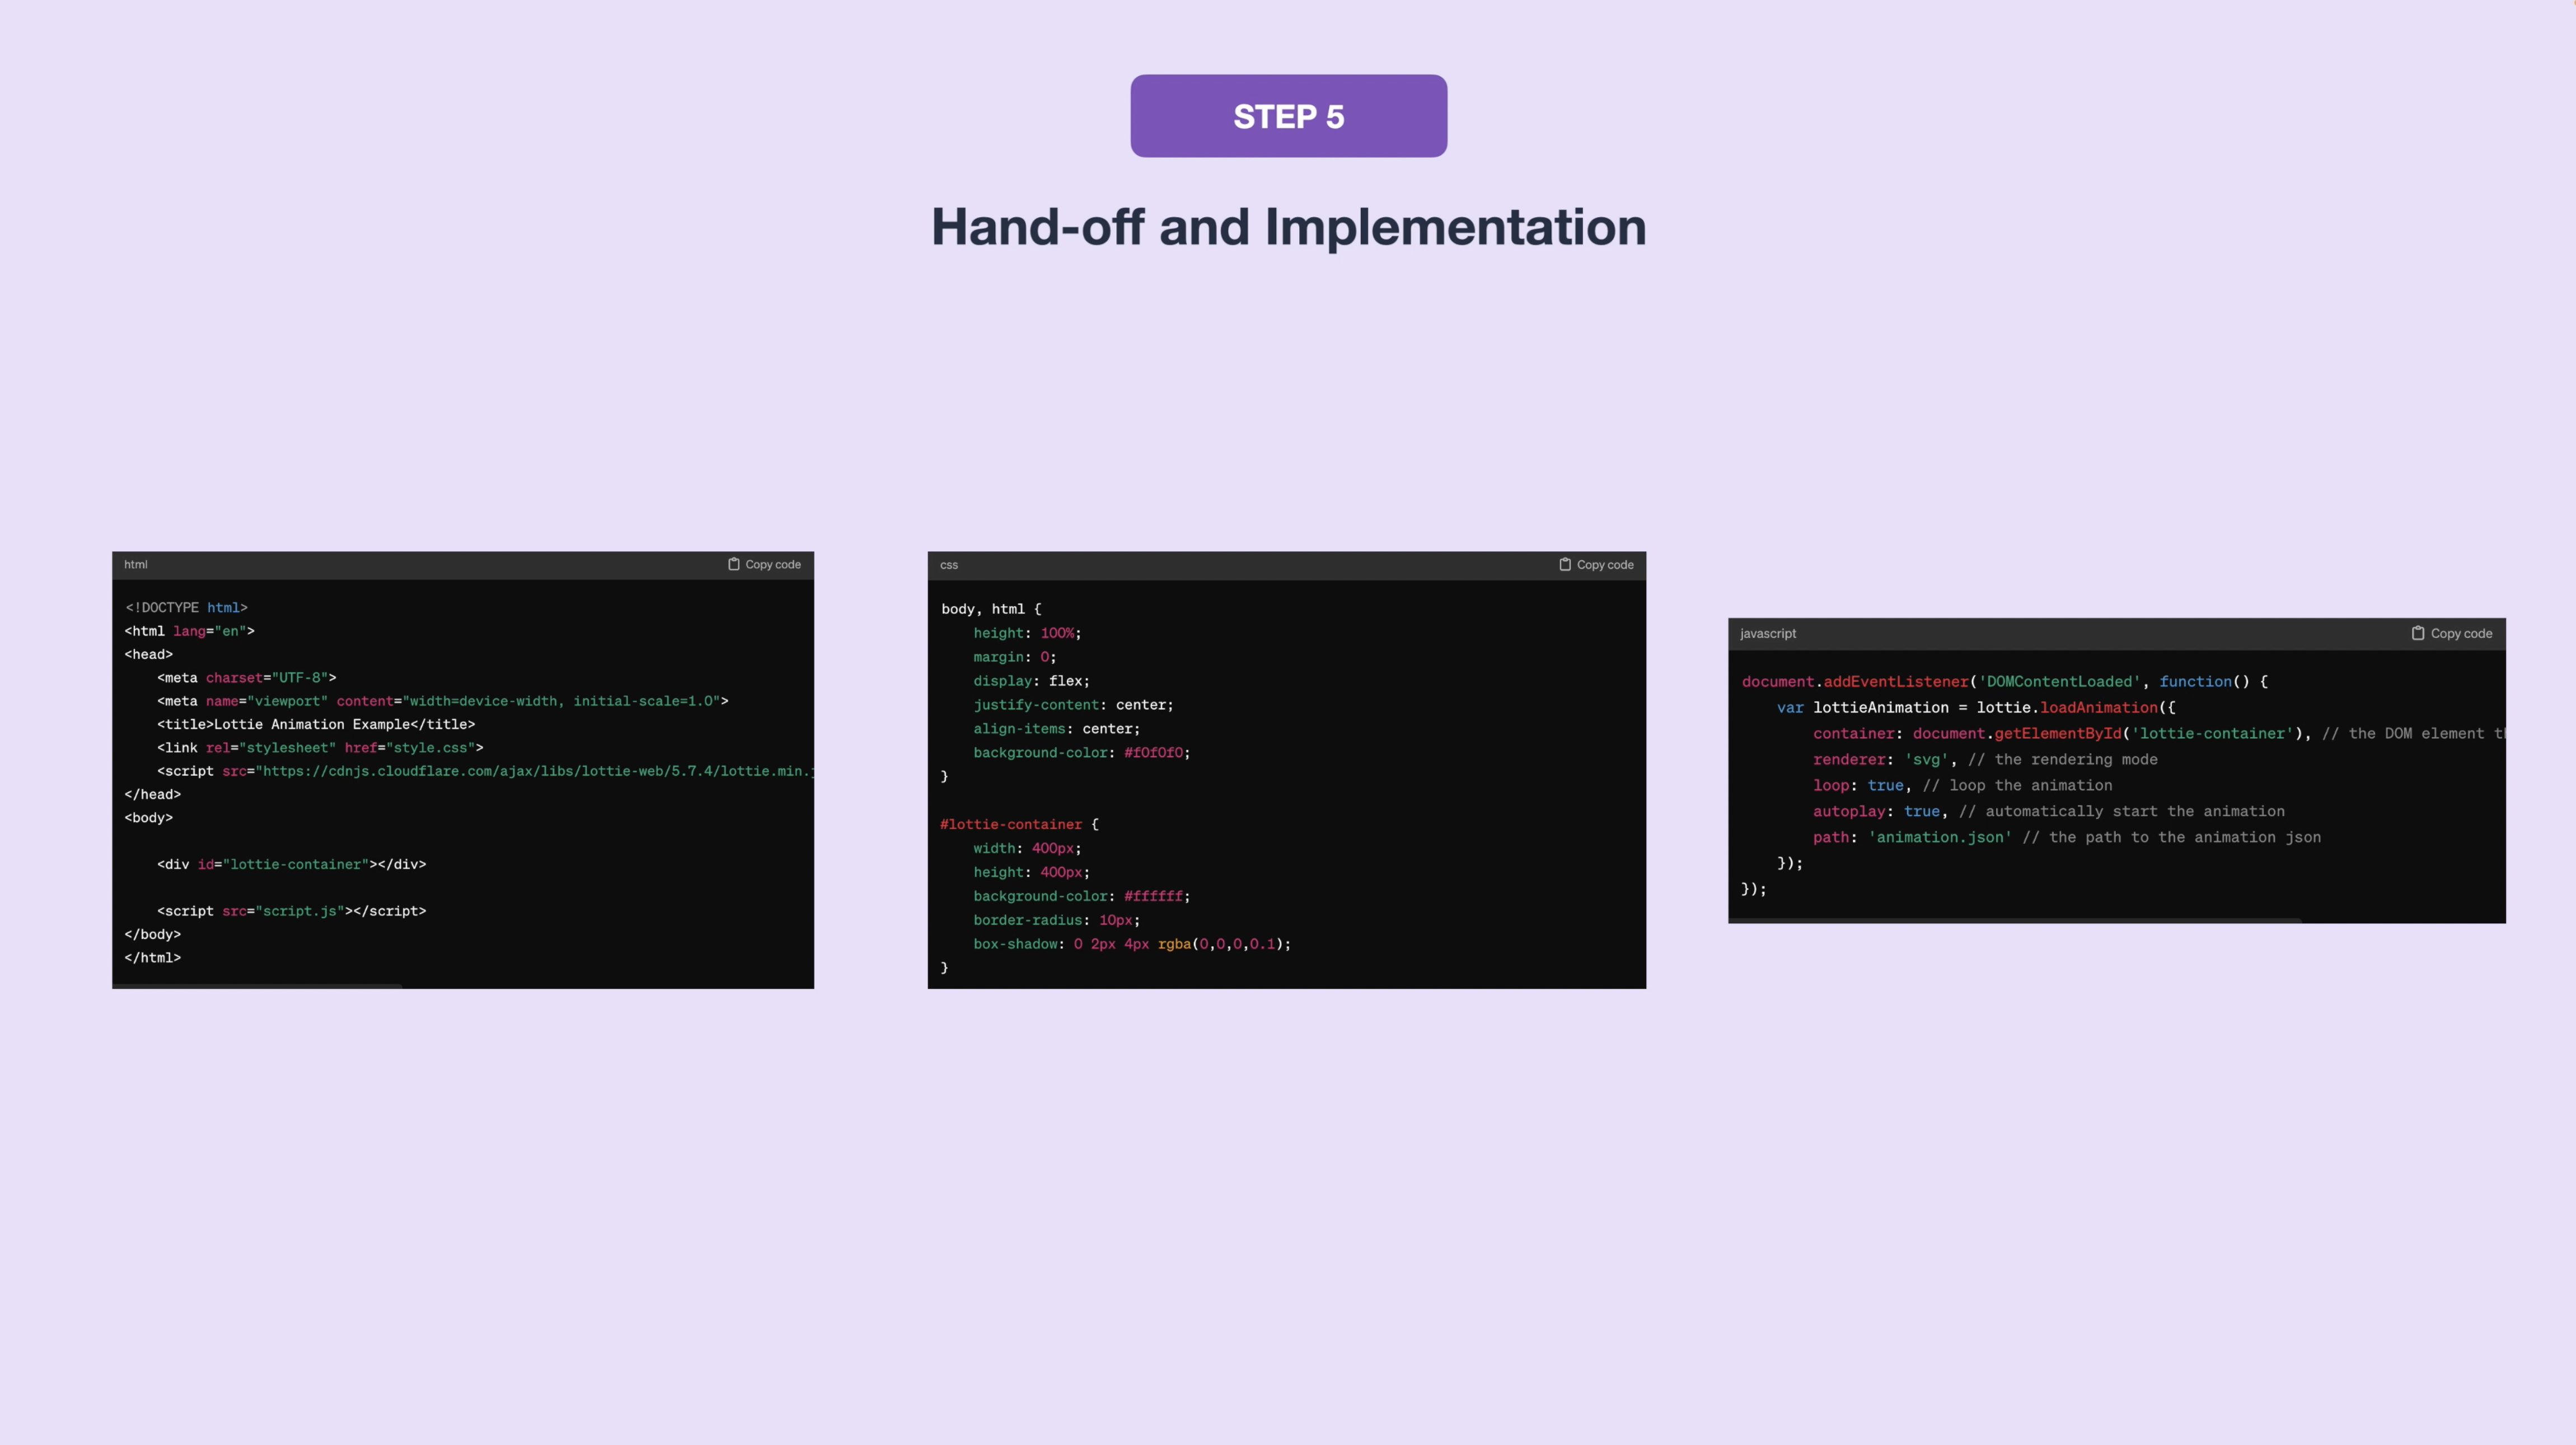 The Complete Guide to UI Animations, Micro-Interactions and Tools